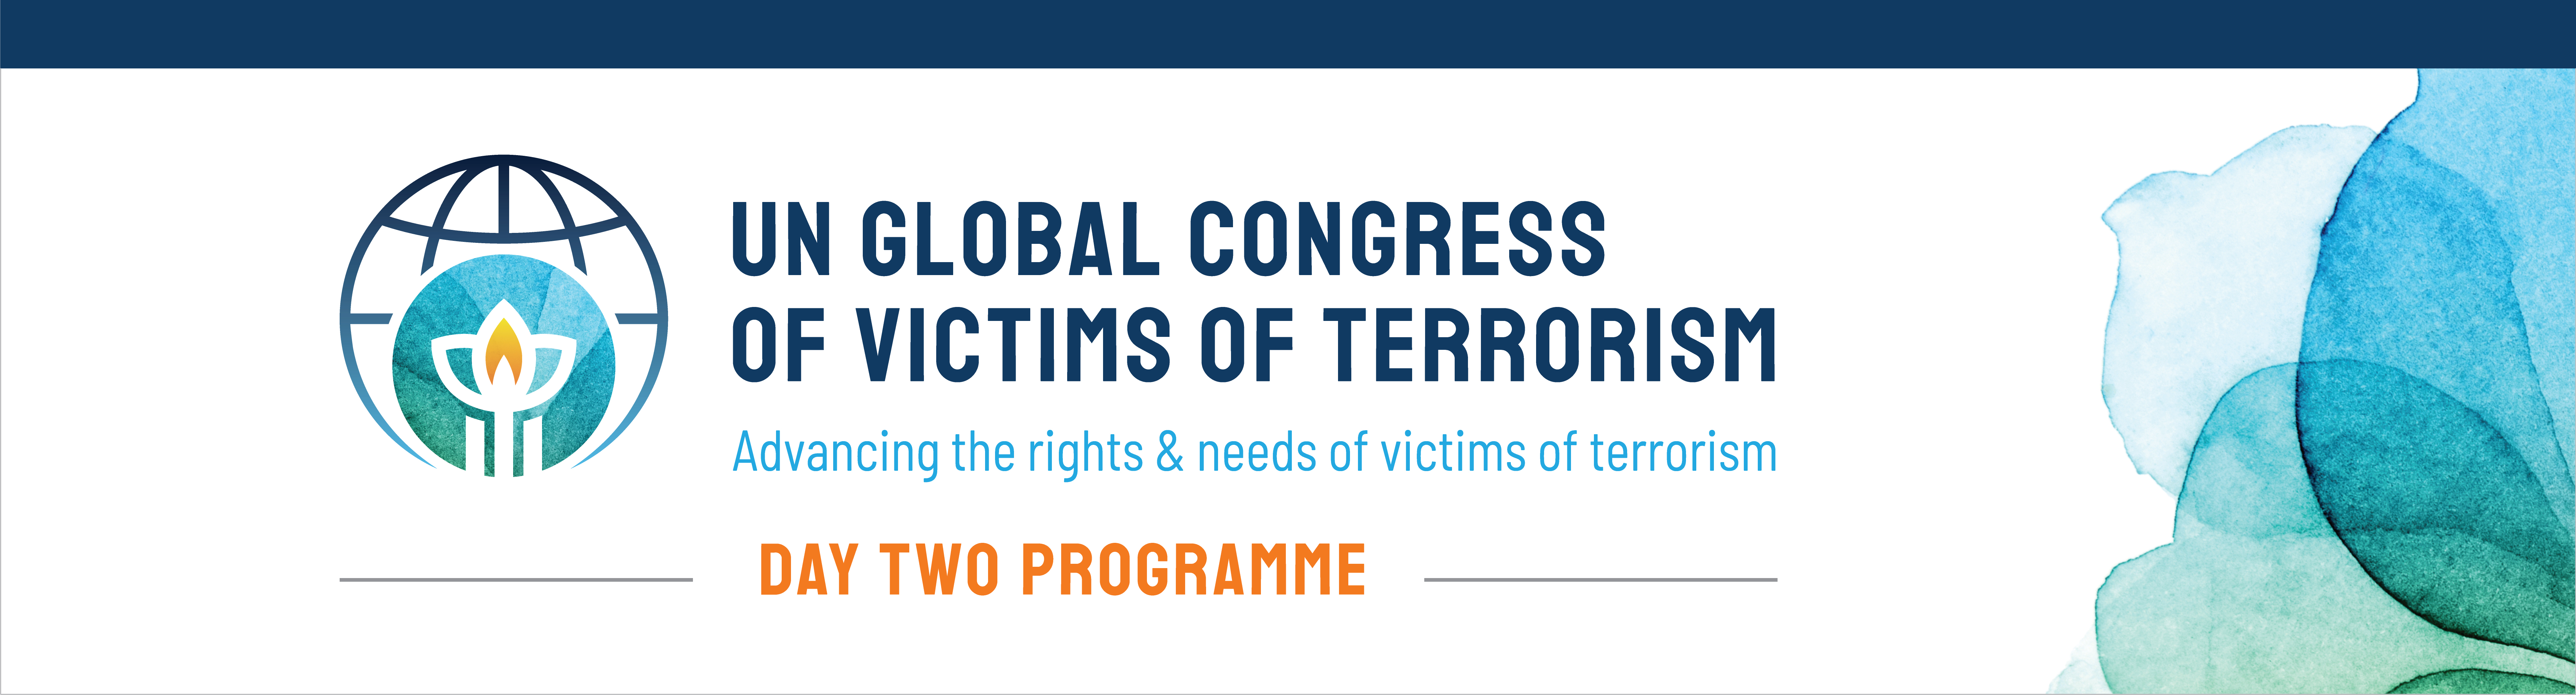 Banner of the Day Two Programme page of the UN Global Congress of Victims of Terrorism